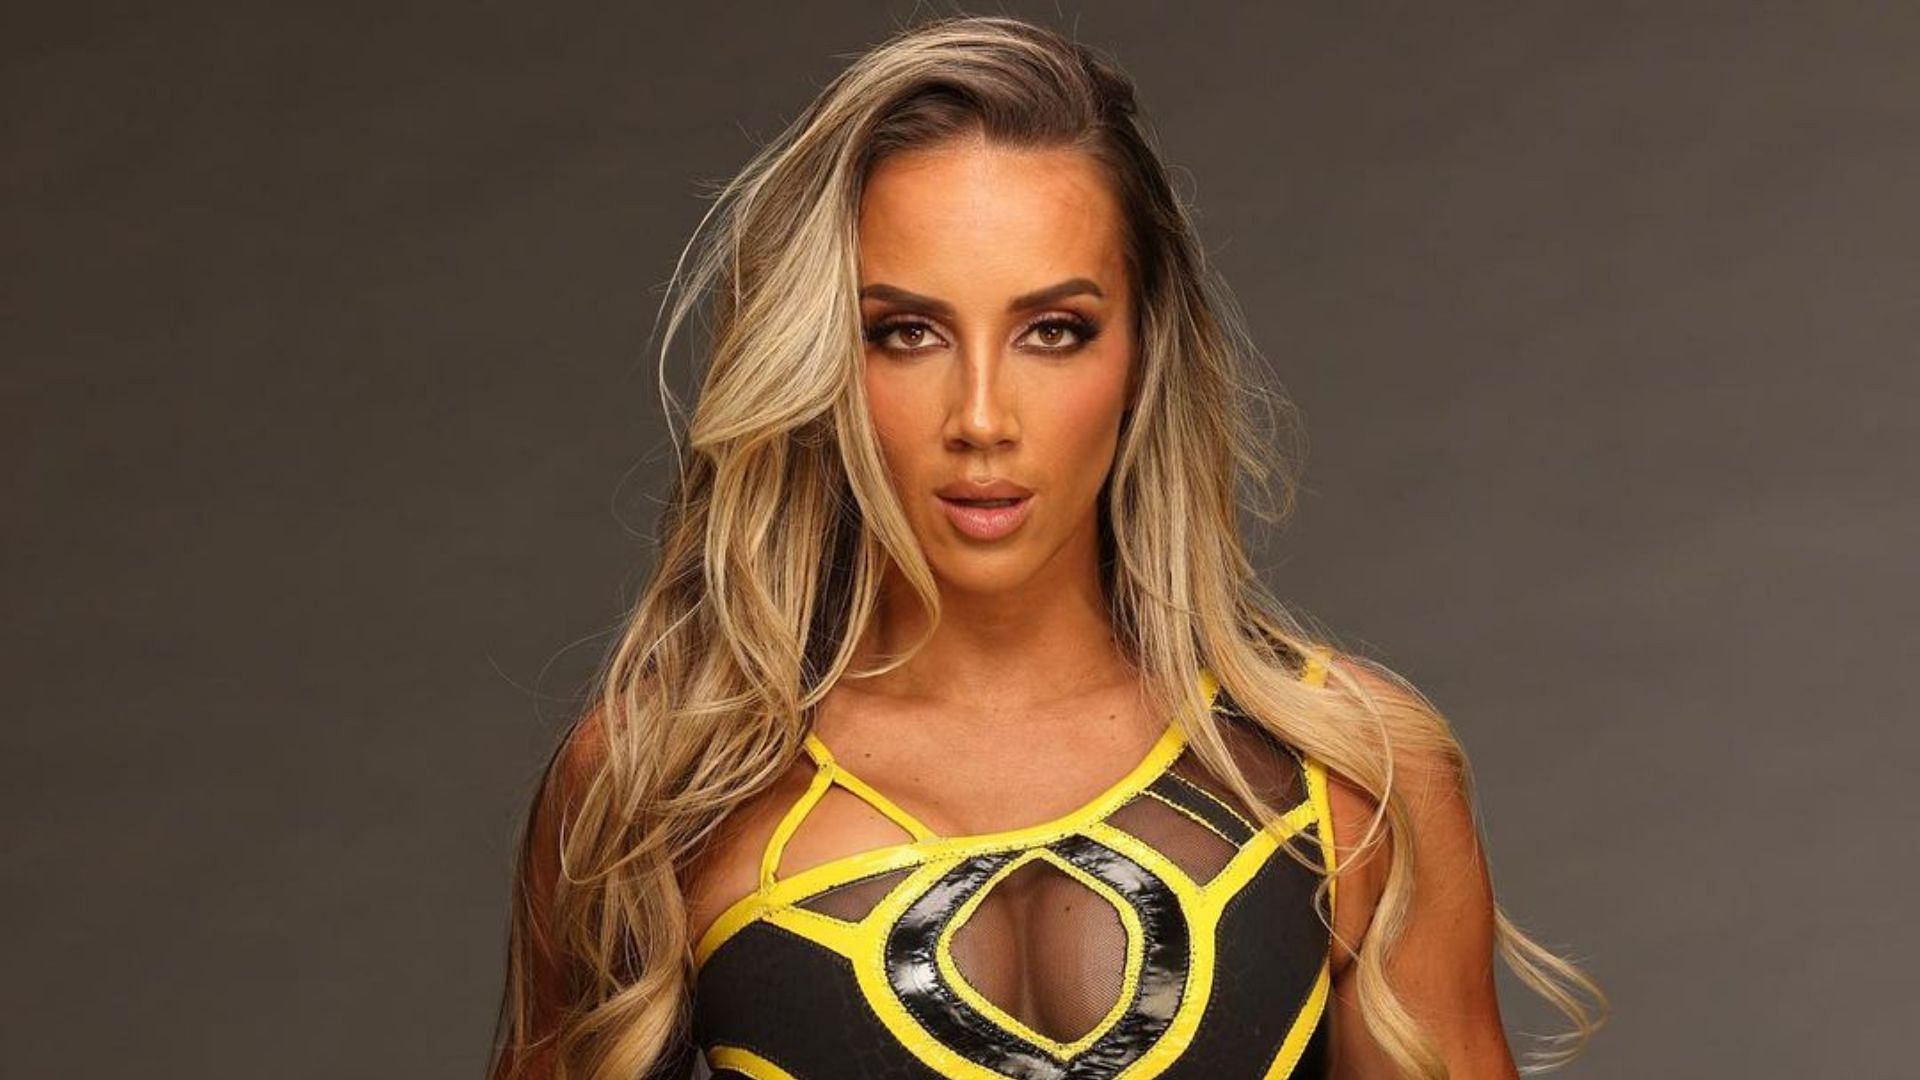 Chelsea Green is the current WWE Women